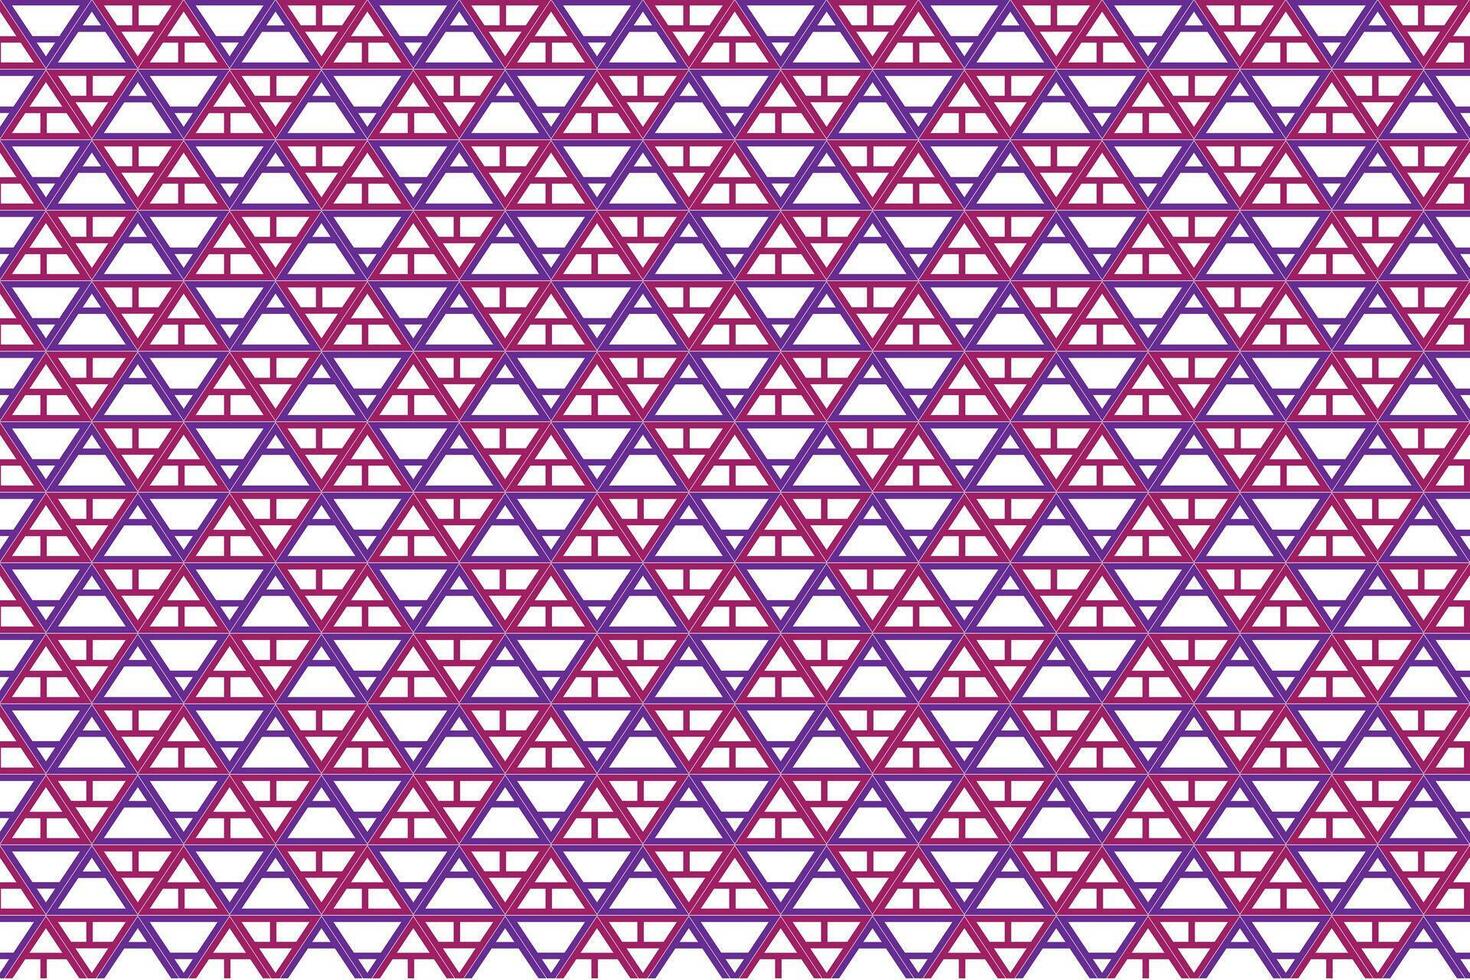 Illustration wallpaper, Abstract Geometric Style. Repeating Sample triangle color line on white background. vector